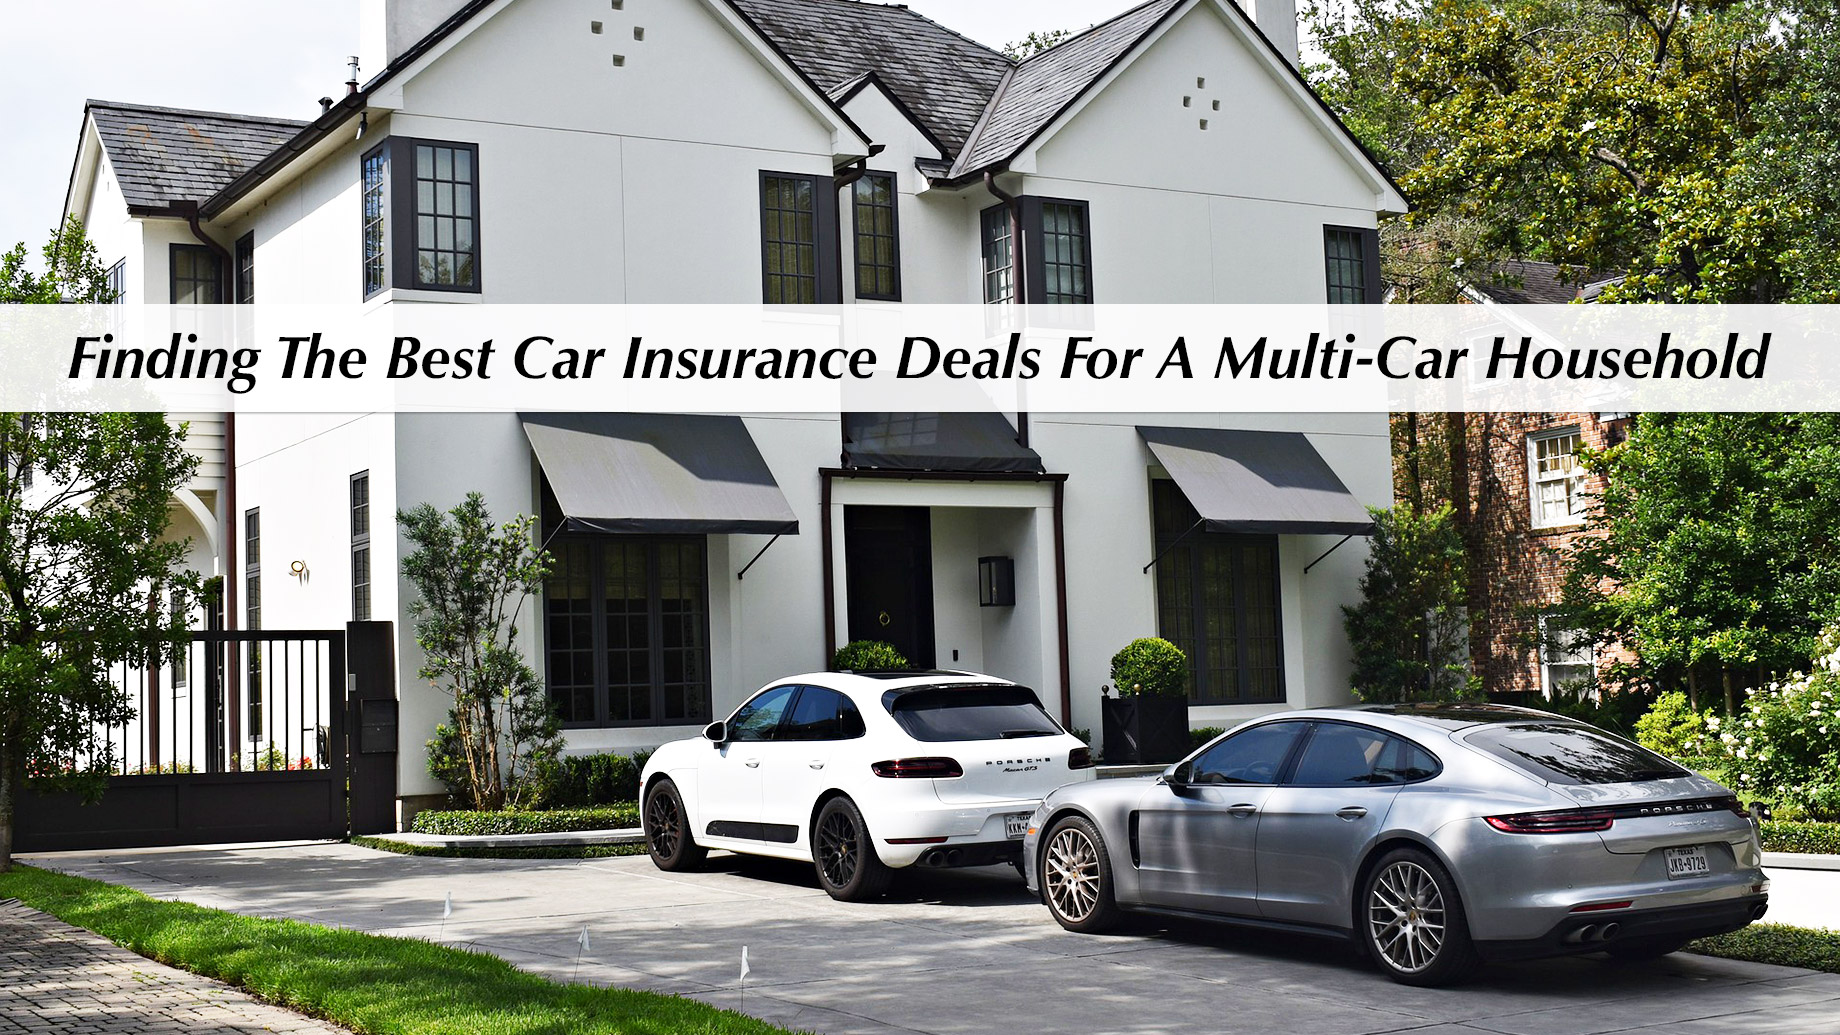 Finding The Best Car Insurance Deals For A Multi-Car Household